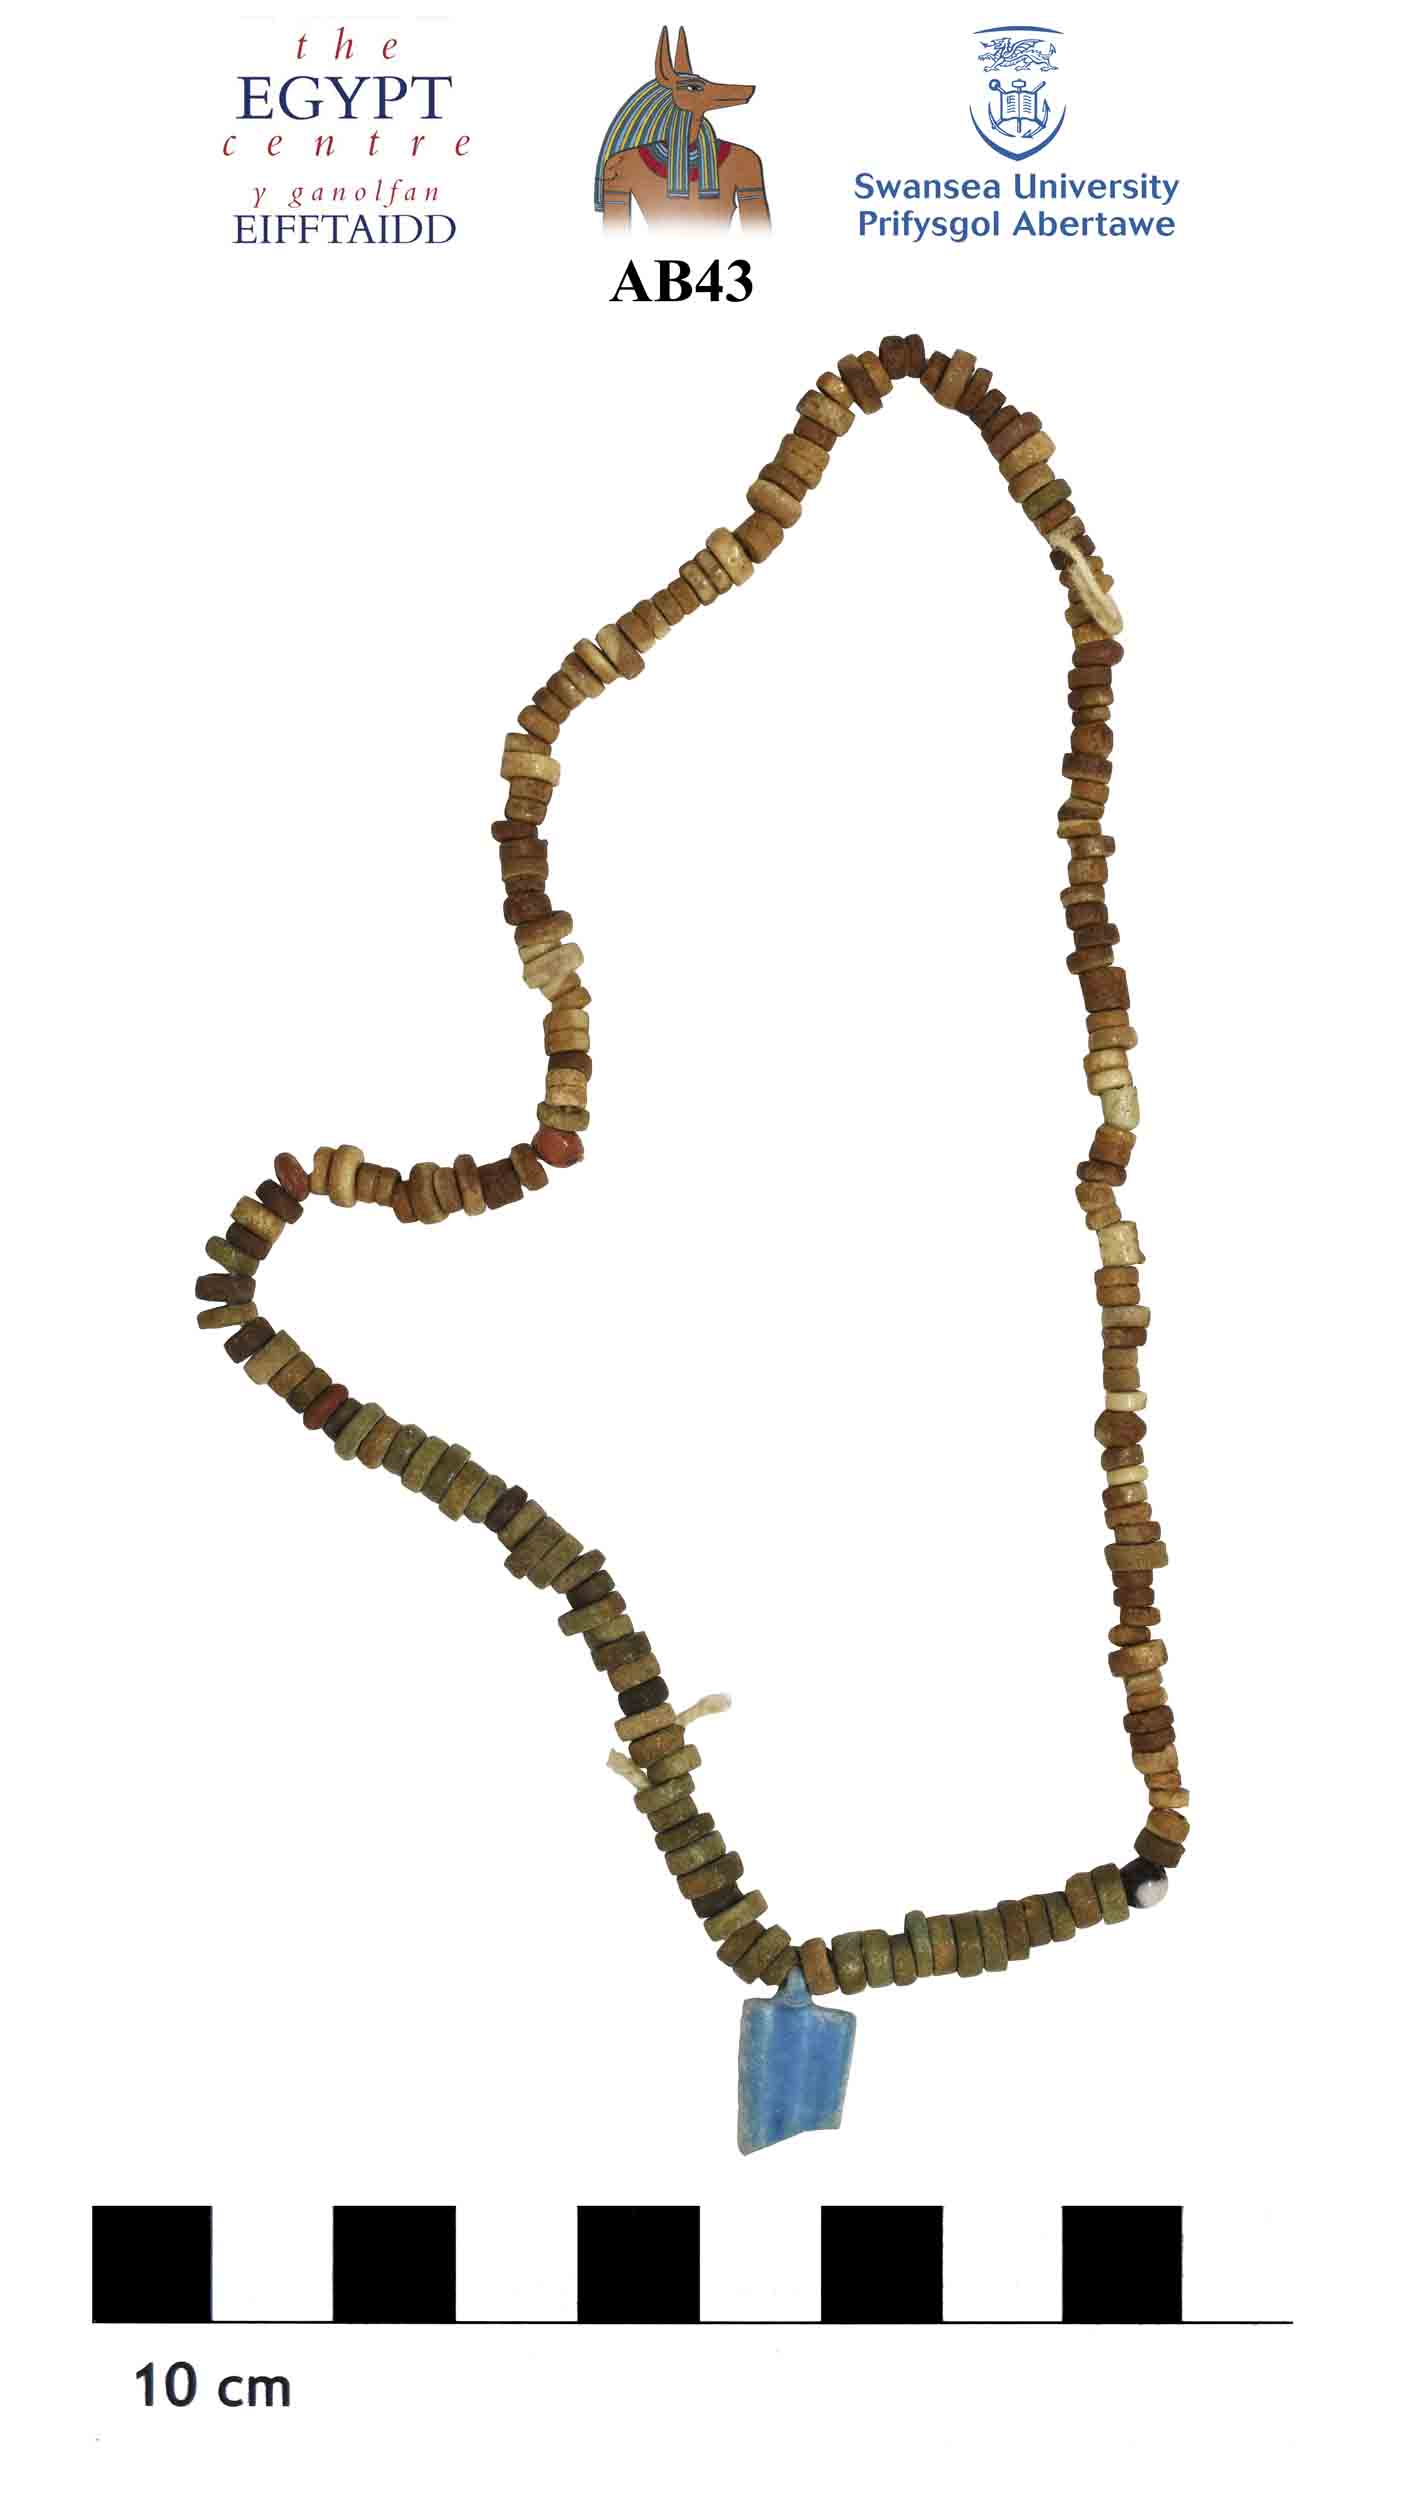 Image for: String of beads